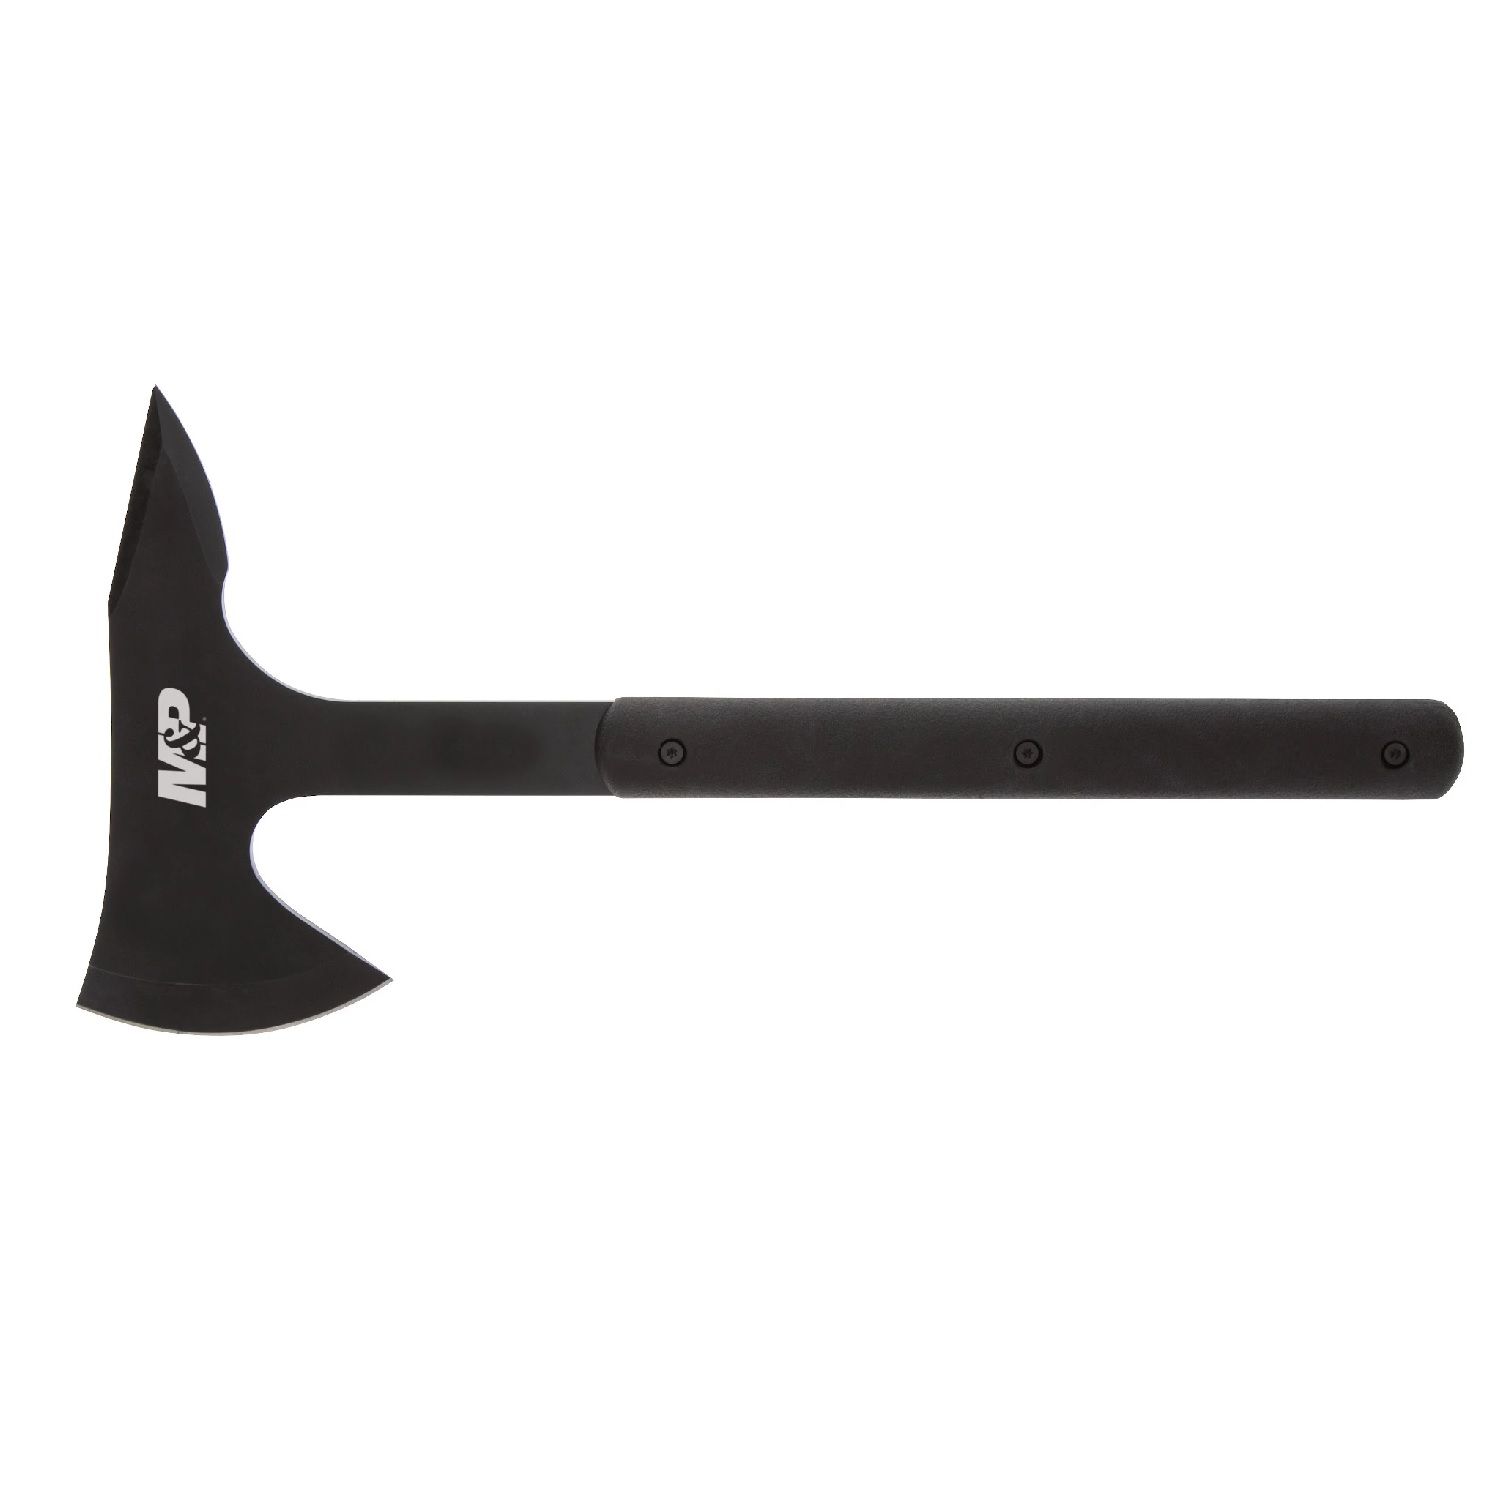 M & P Accessories 1117197 Tactical Axe - Clam